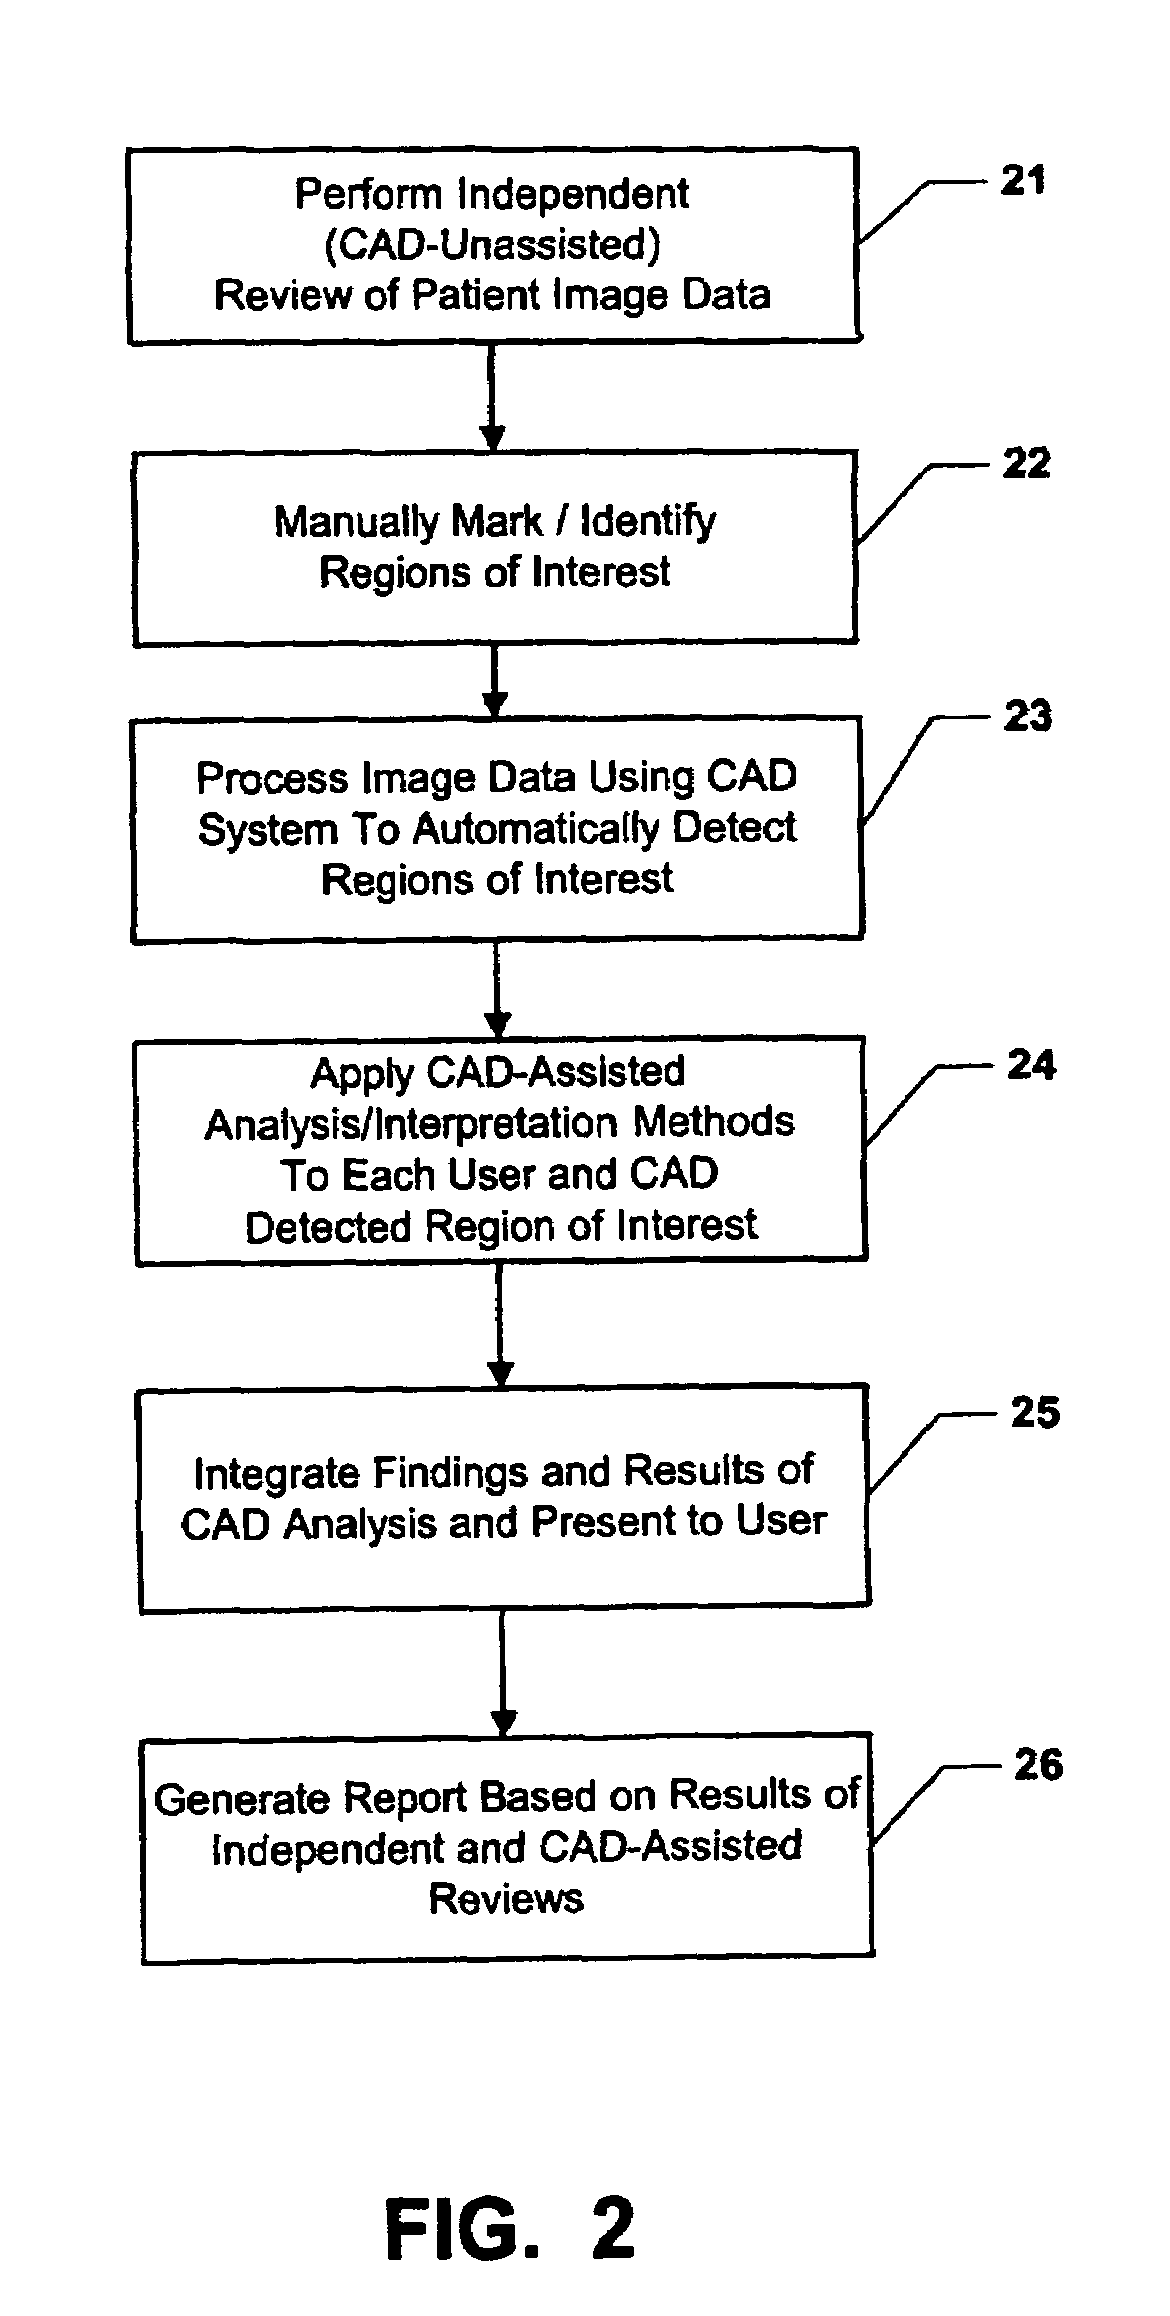 CAD (computer-aided decision) support systems and methods